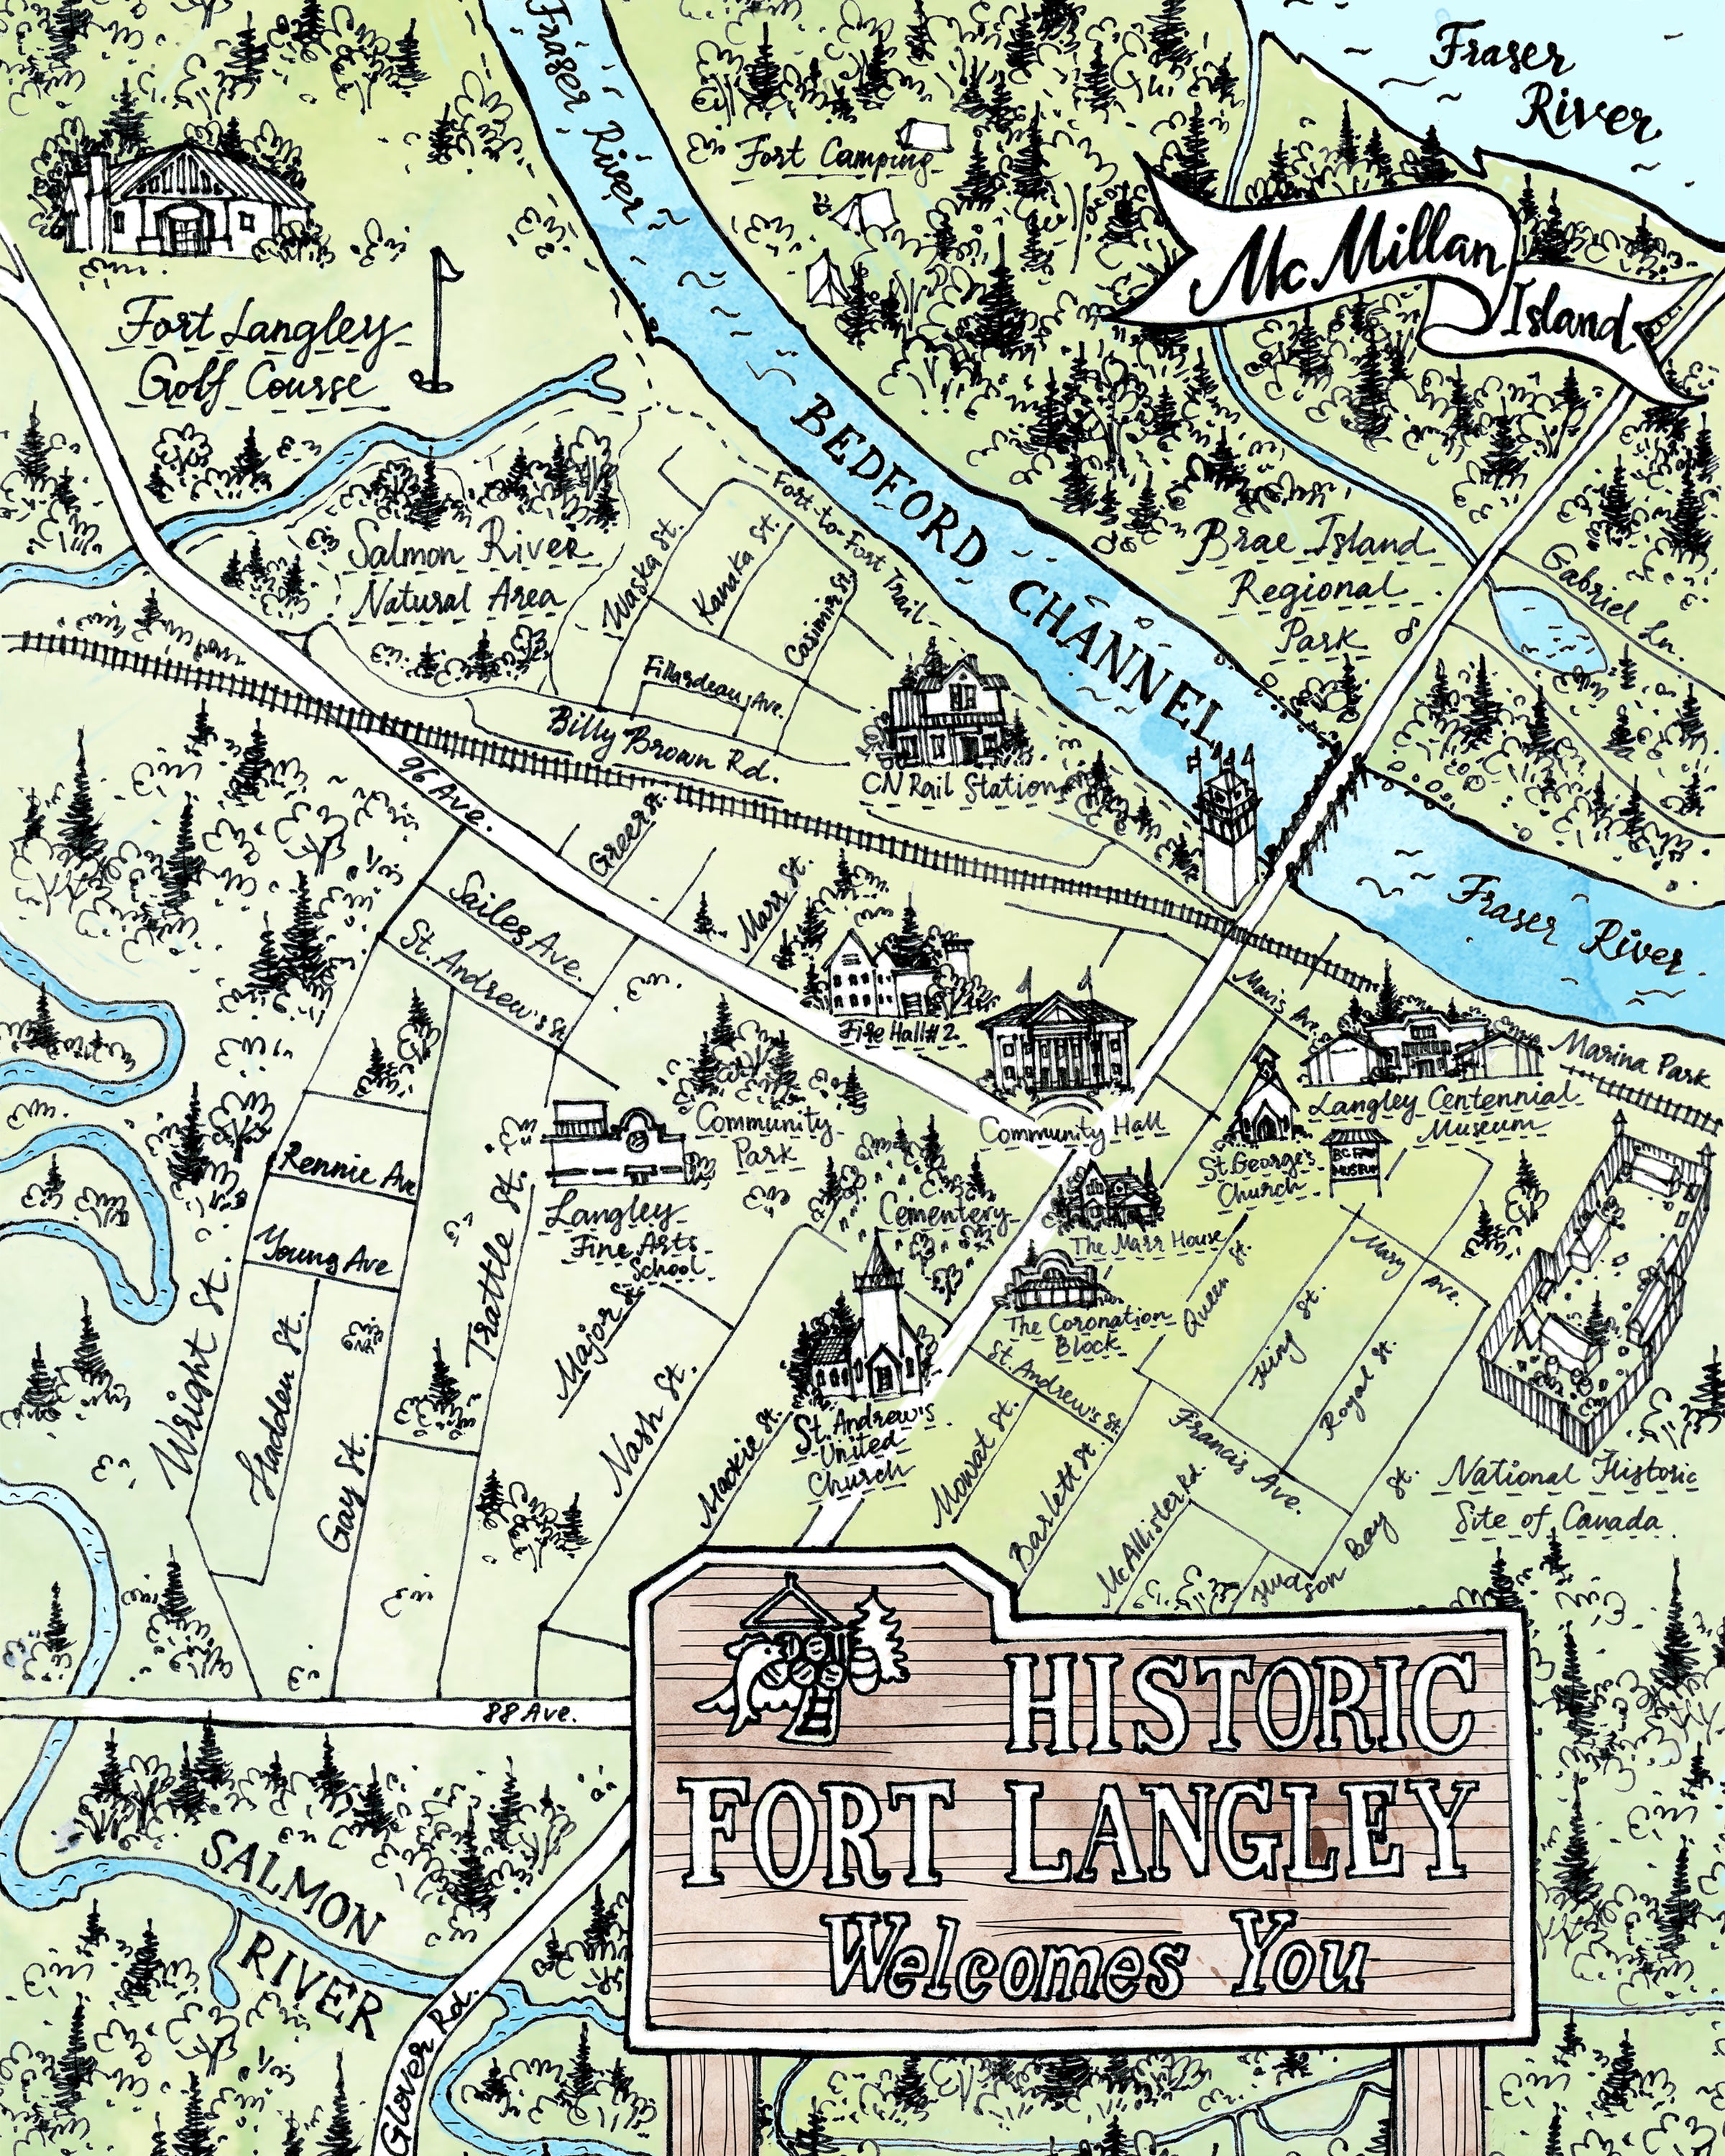 City of Fort Langley, BC Map - Watercolour Print